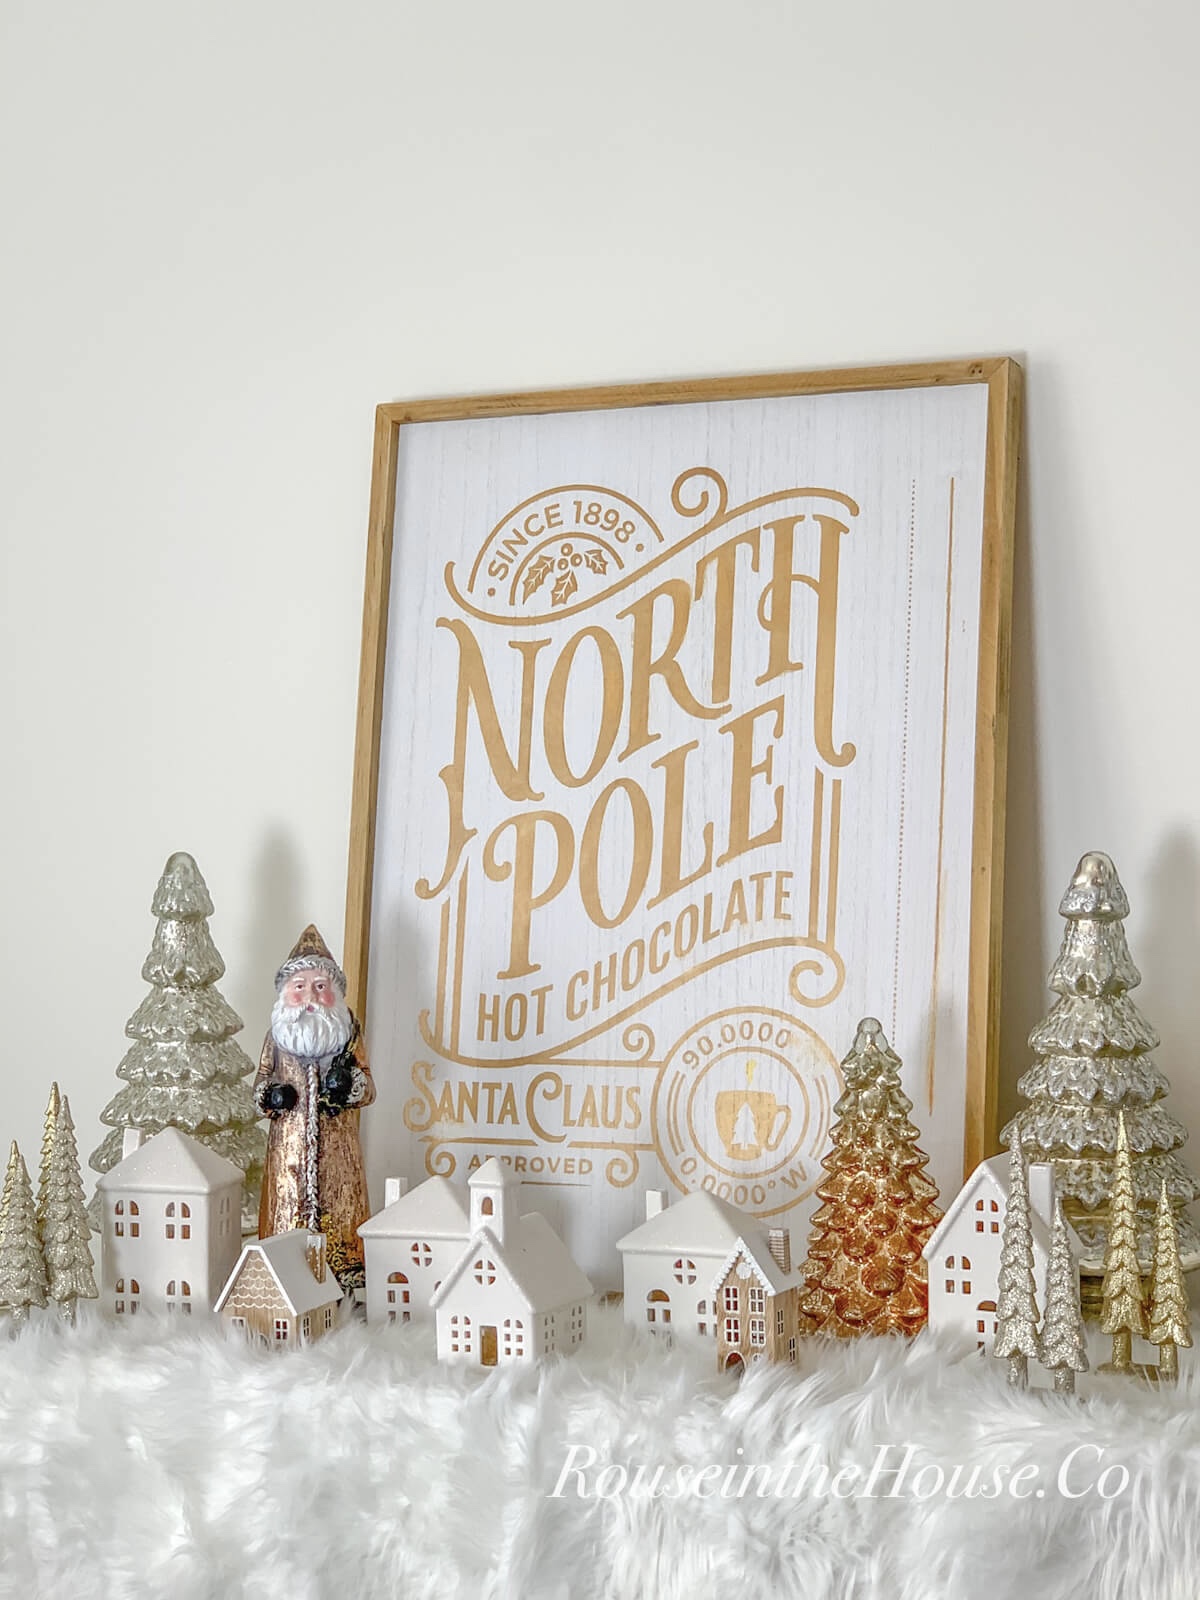 A large Christmas sign that says, "North Pole Hot Chocolate" is sitting on a buffet and surrounded by Christmas village houses, mercury glass trees, and a vintage style Santa.